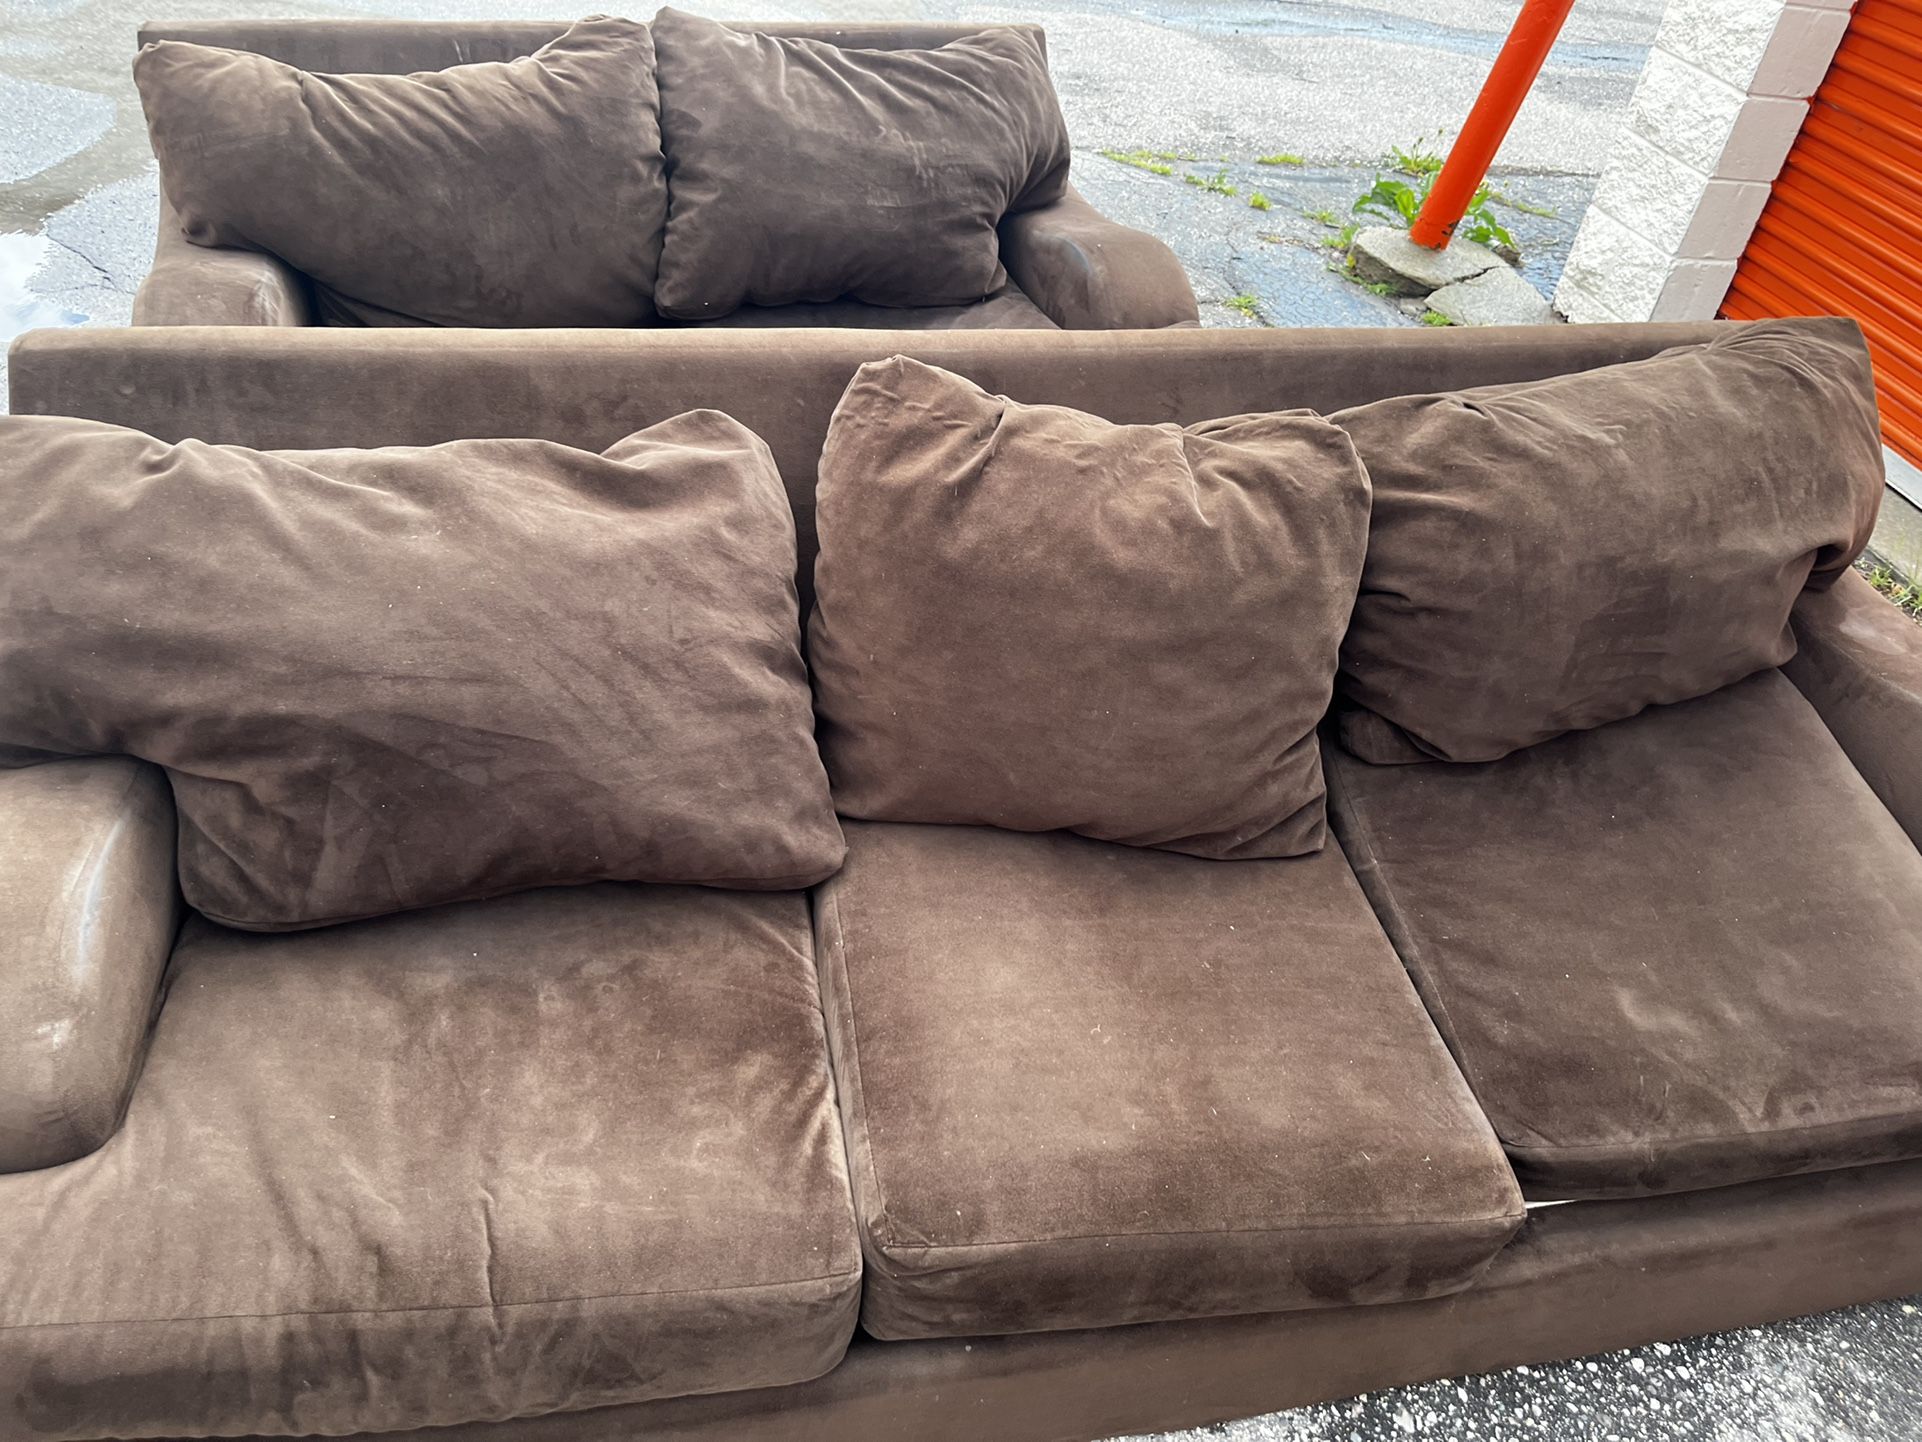 MICROFIBER BROWN COUCH 175 OBO FREE DELIVERY FREE DELIVERY  CUSHION ARE WET IN PIC FROM CLEANING 